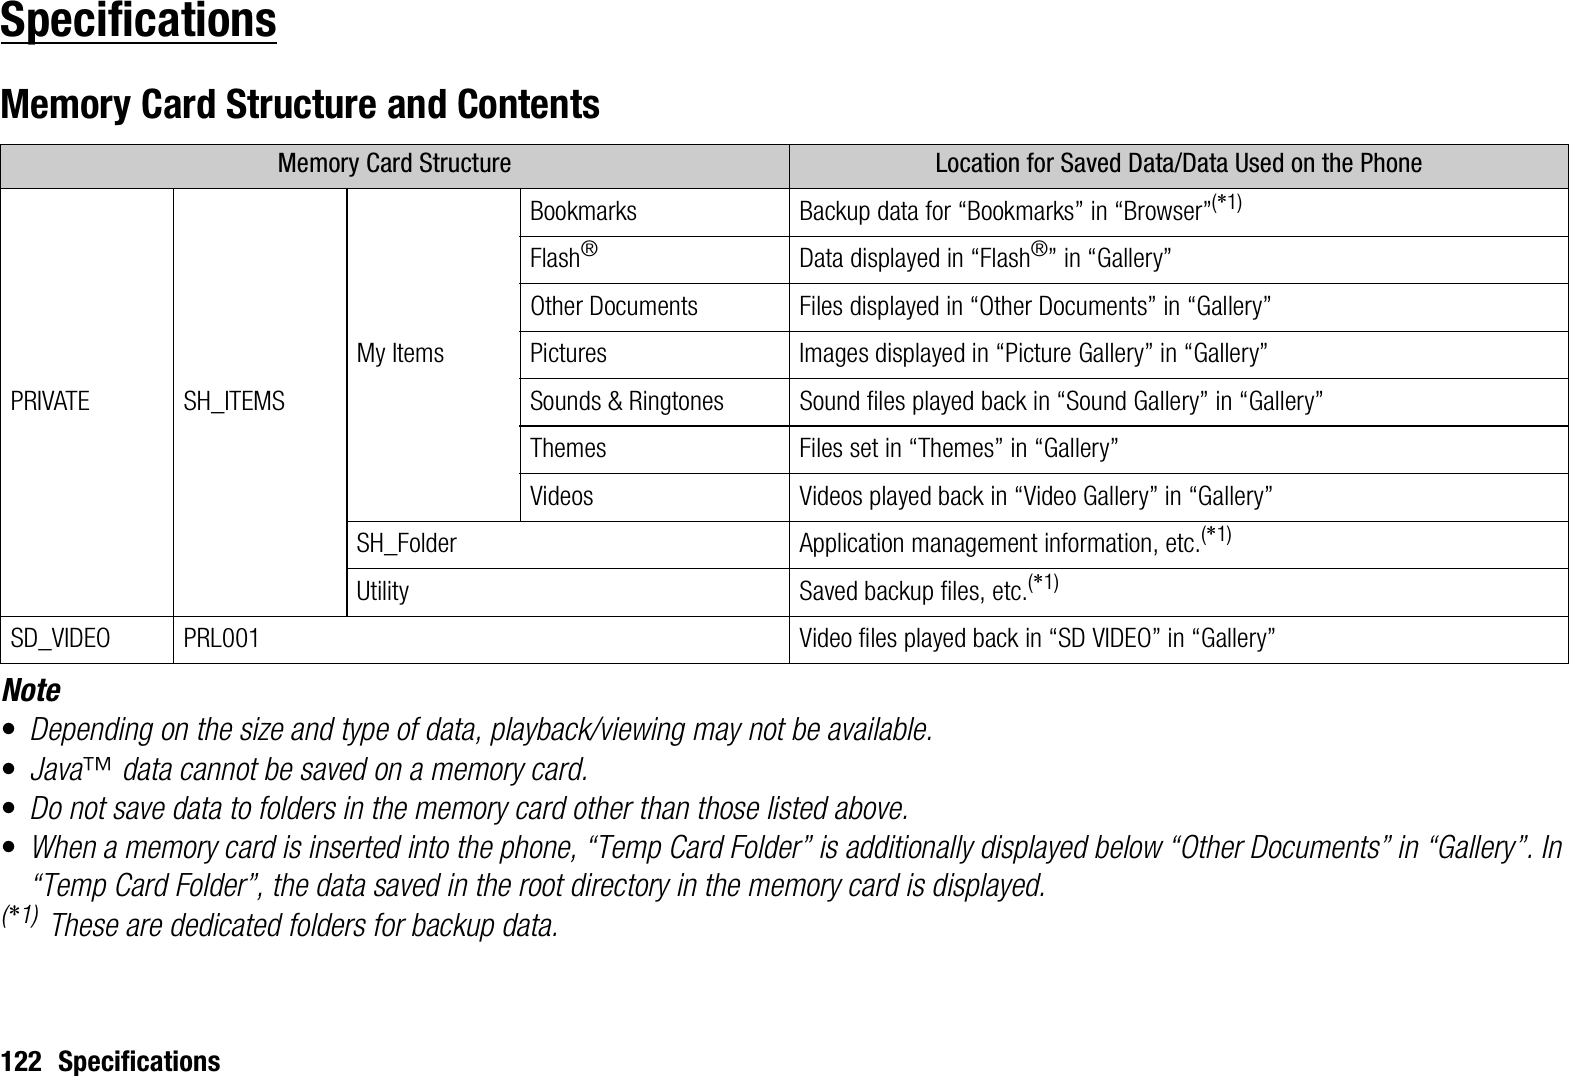 122 SpecificationsSpecificationsMemory Card Structure and ContentsNote•Depending on the size and type of data, playback/viewing may not be available.•Java™ data cannot be saved on a memory card.•Do not save data to folders in the memory card other than those listed above.•When a memory card is inserted into the phone, “Temp Card Folder” is additionally displayed below “Other Documents” in “Gallery”. In “Temp Card Folder”, the data saved in the root directory in the memory card is displayed.(*1) These are dedicated folders for backup data.Memory Card Structure Location for Saved Data/Data Used on the PhonePRIVATE SH_ITEMSMy ItemsBookmarks Backup data for “Bookmarks” in “Browser”(*1)Flash®Data displayed in “Flash®” in “Gallery”Other Documents Files displayed in “Other Documents” in “Gallery”Pictures Images displayed in “Picture Gallery” in “Gallery”Sounds &amp; Ringtones Sound files played back in “Sound Gallery” in “Gallery”Themes Files set in “Themes” in “Gallery”Videos Videos played back in “Video Gallery” in “Gallery”SH_Folder Application management information, etc.(*1)Utility Saved backup files, etc.(*1)SD_VIDEO PRL001 Video files played back in “SD VIDEO” in “Gallery”